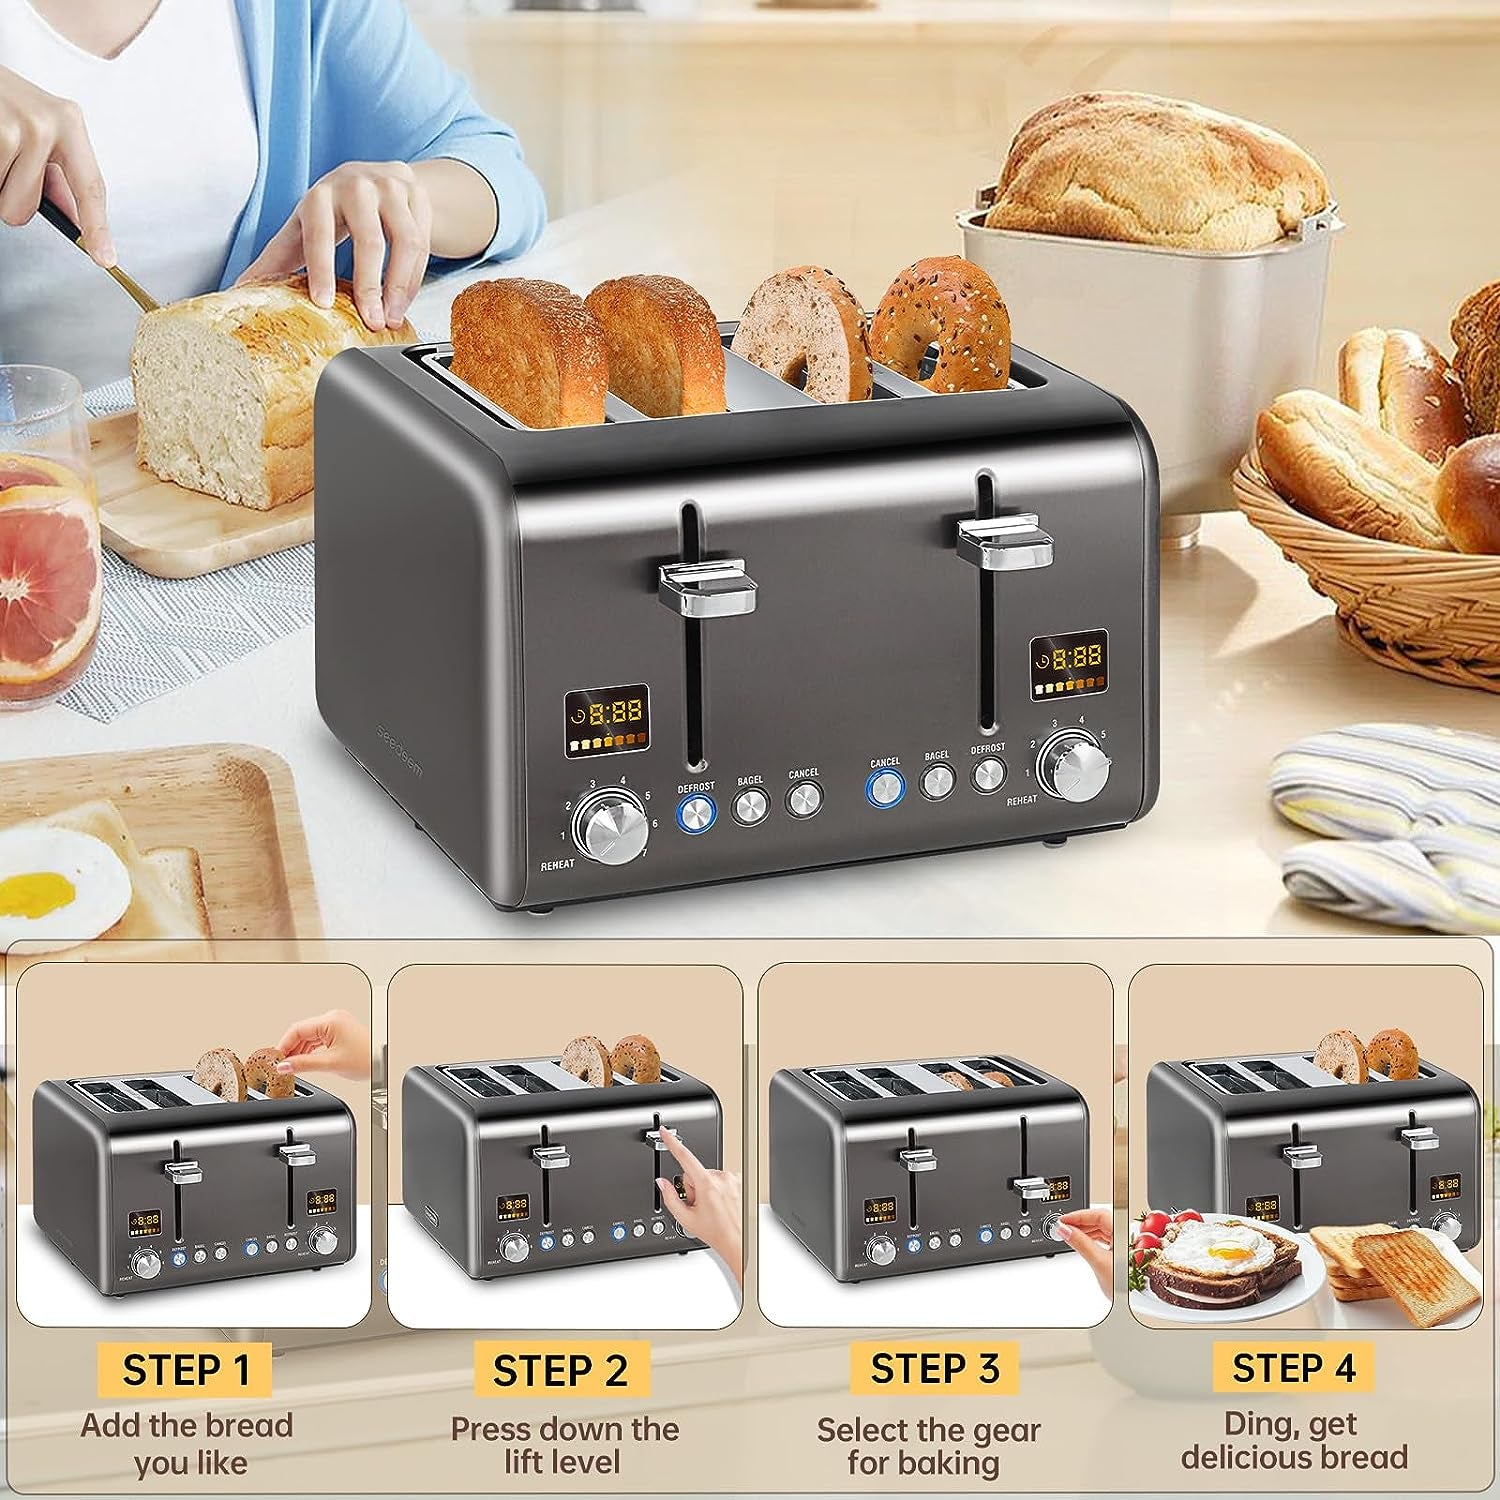 Stainless Steel 4-Slice Toaster with LCD Display, Multiple Shade Settings, Wide Slots, Bagel/Defrost/Reheat Functions, Removable Crumb Tray, Metallic 